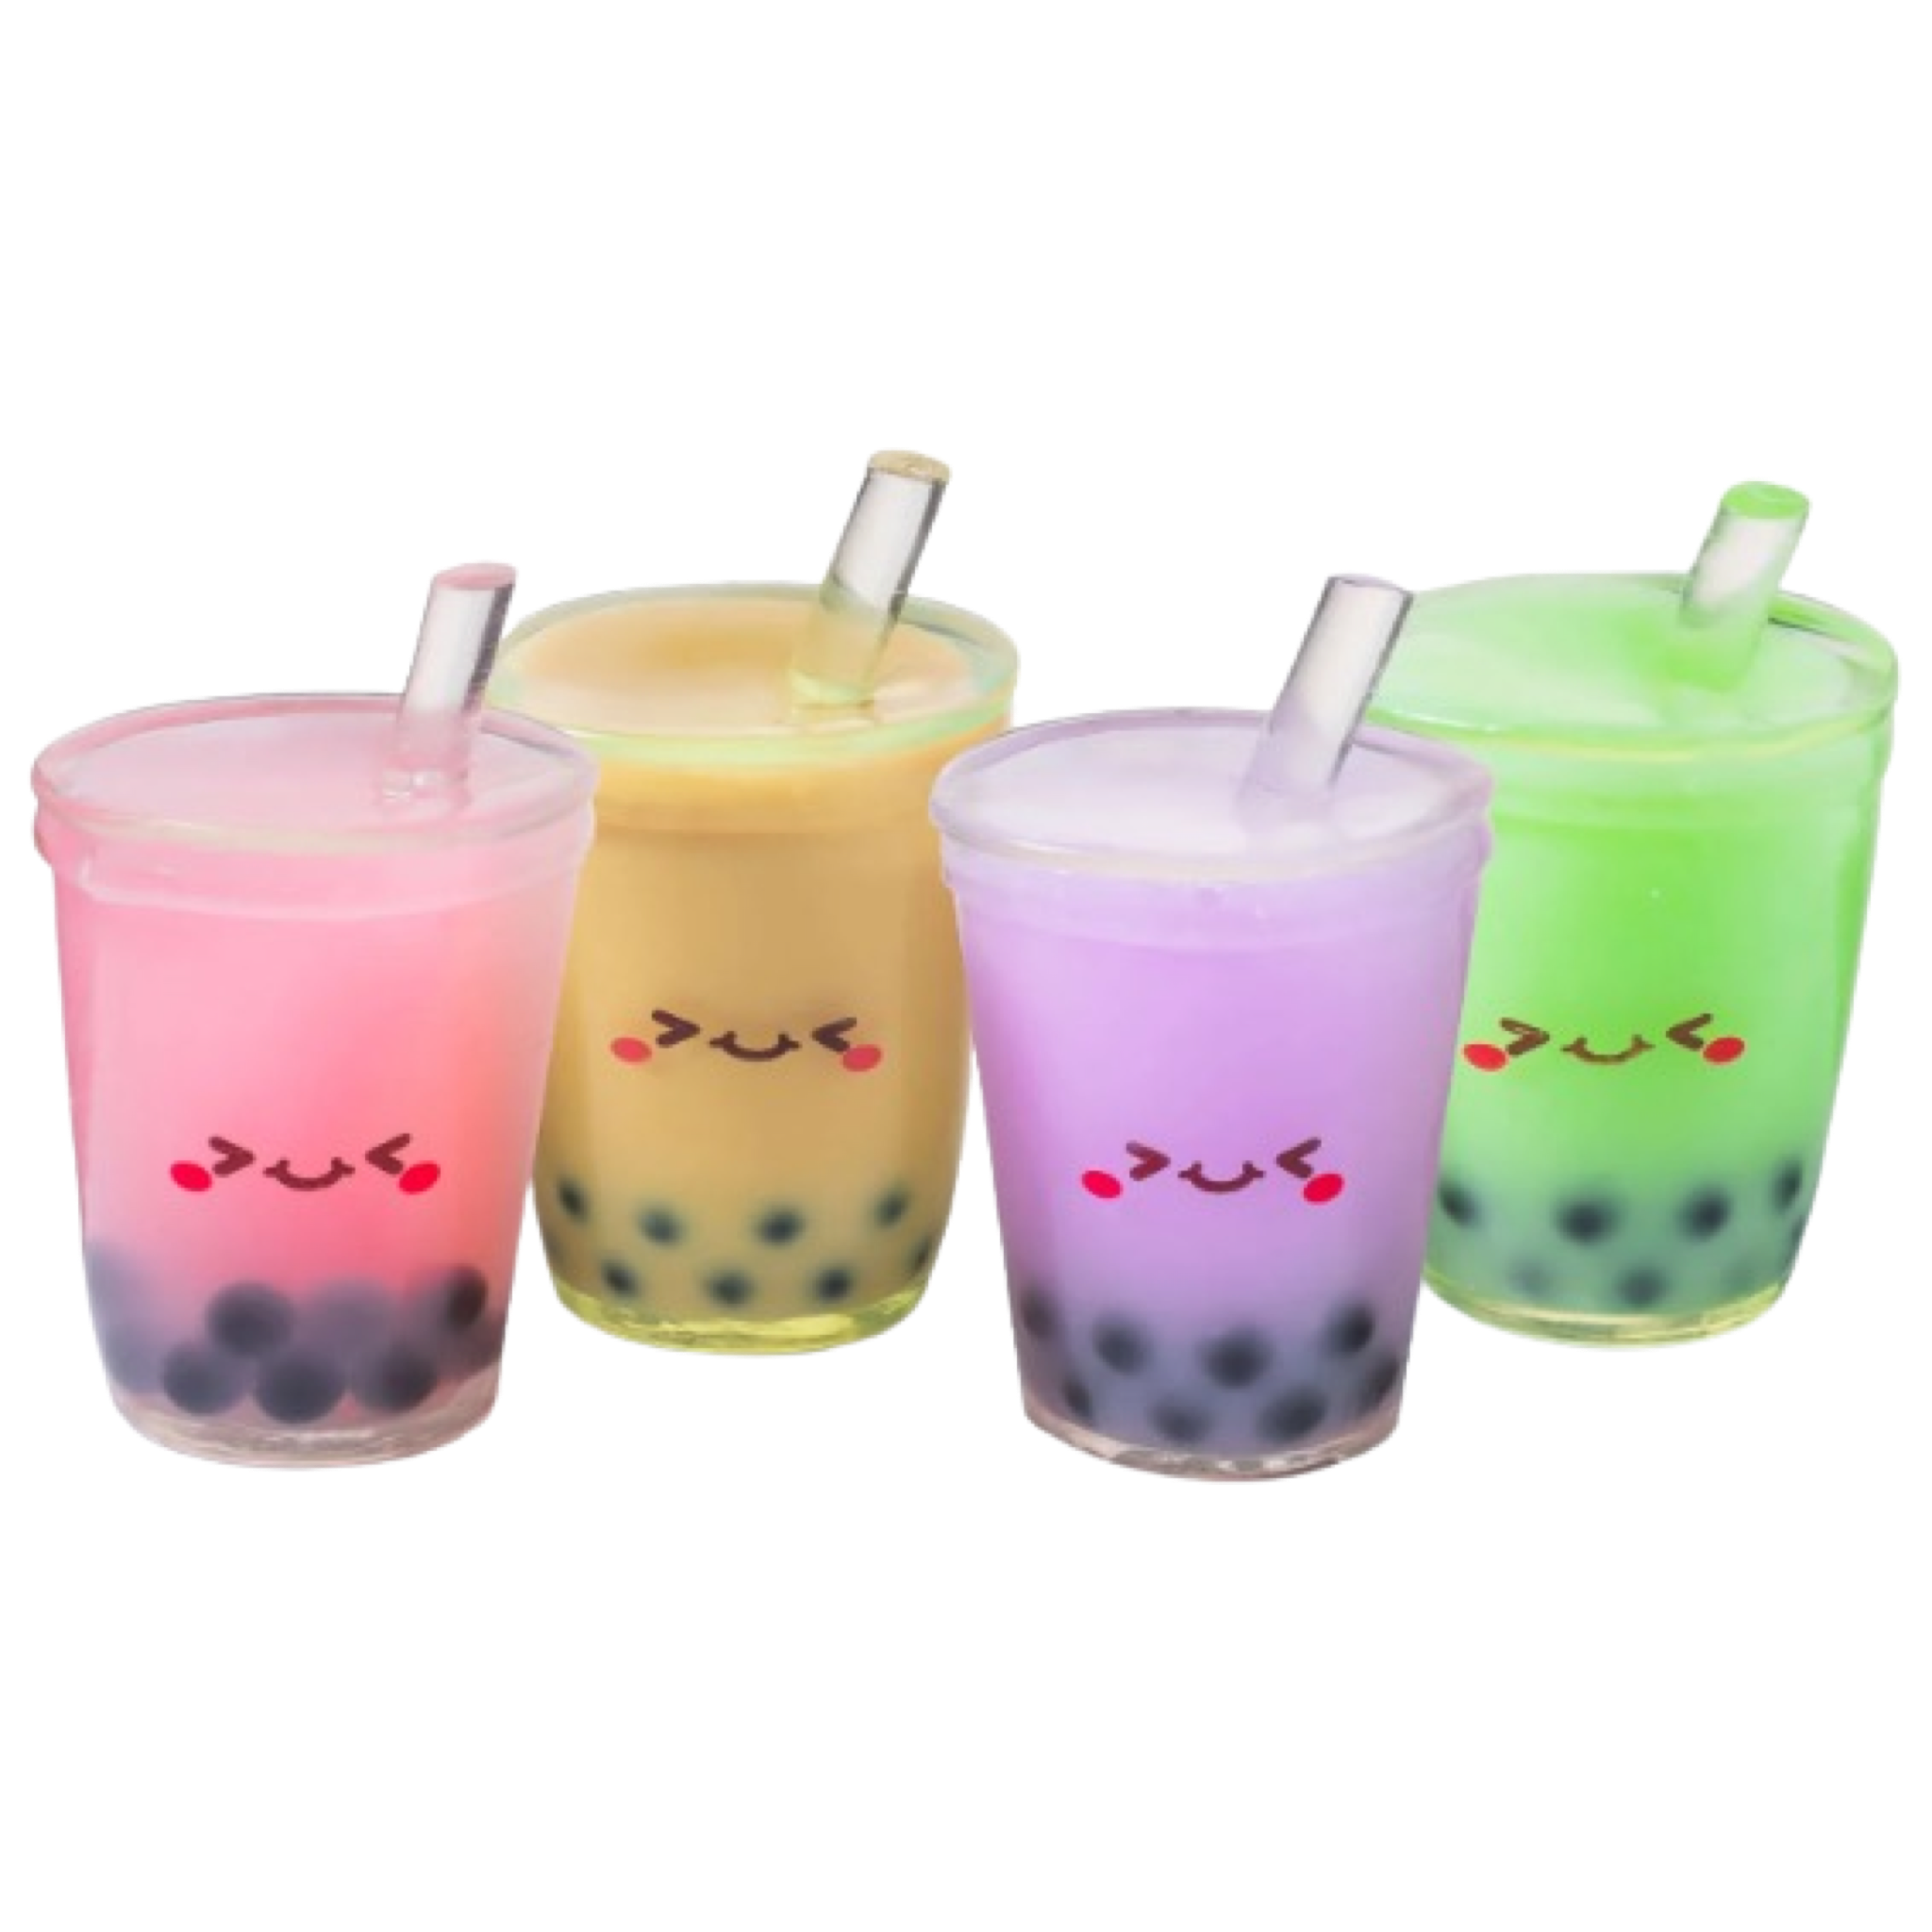 Milk Tea Tapioca Boba Cup squishy Stress Reliever Toy - 5 inch in Height